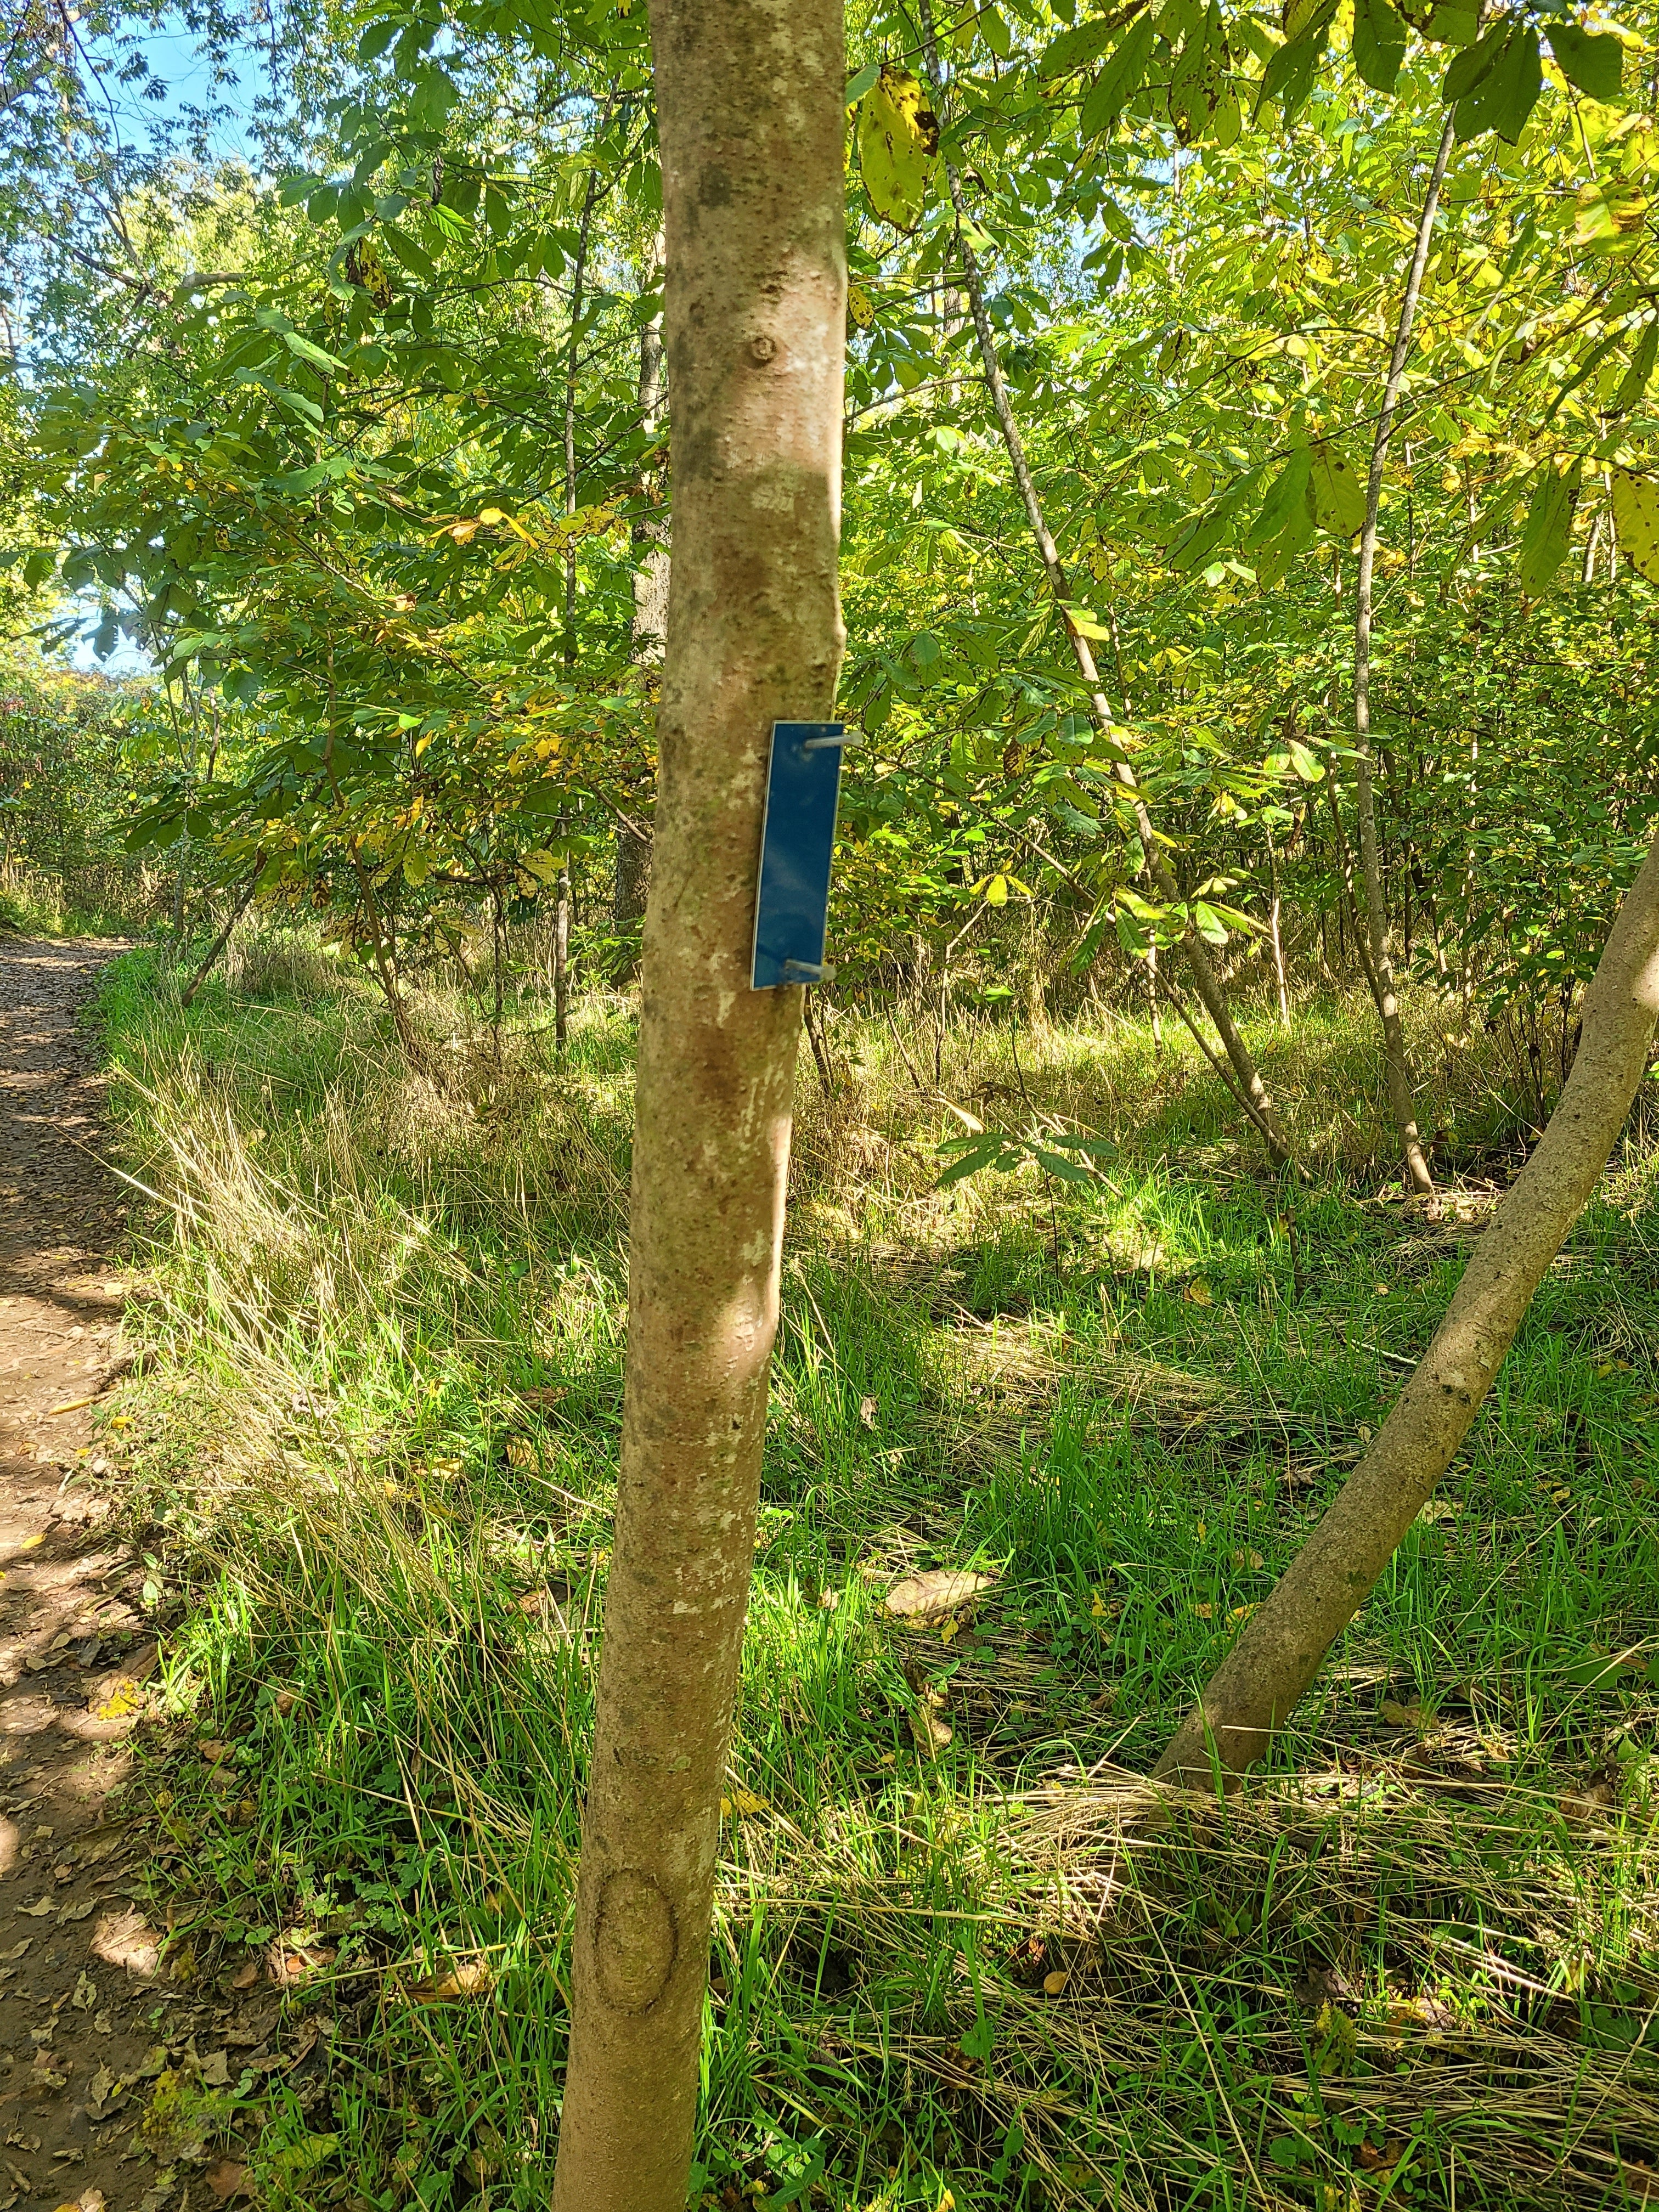 They marked their trees according to the designated paths.